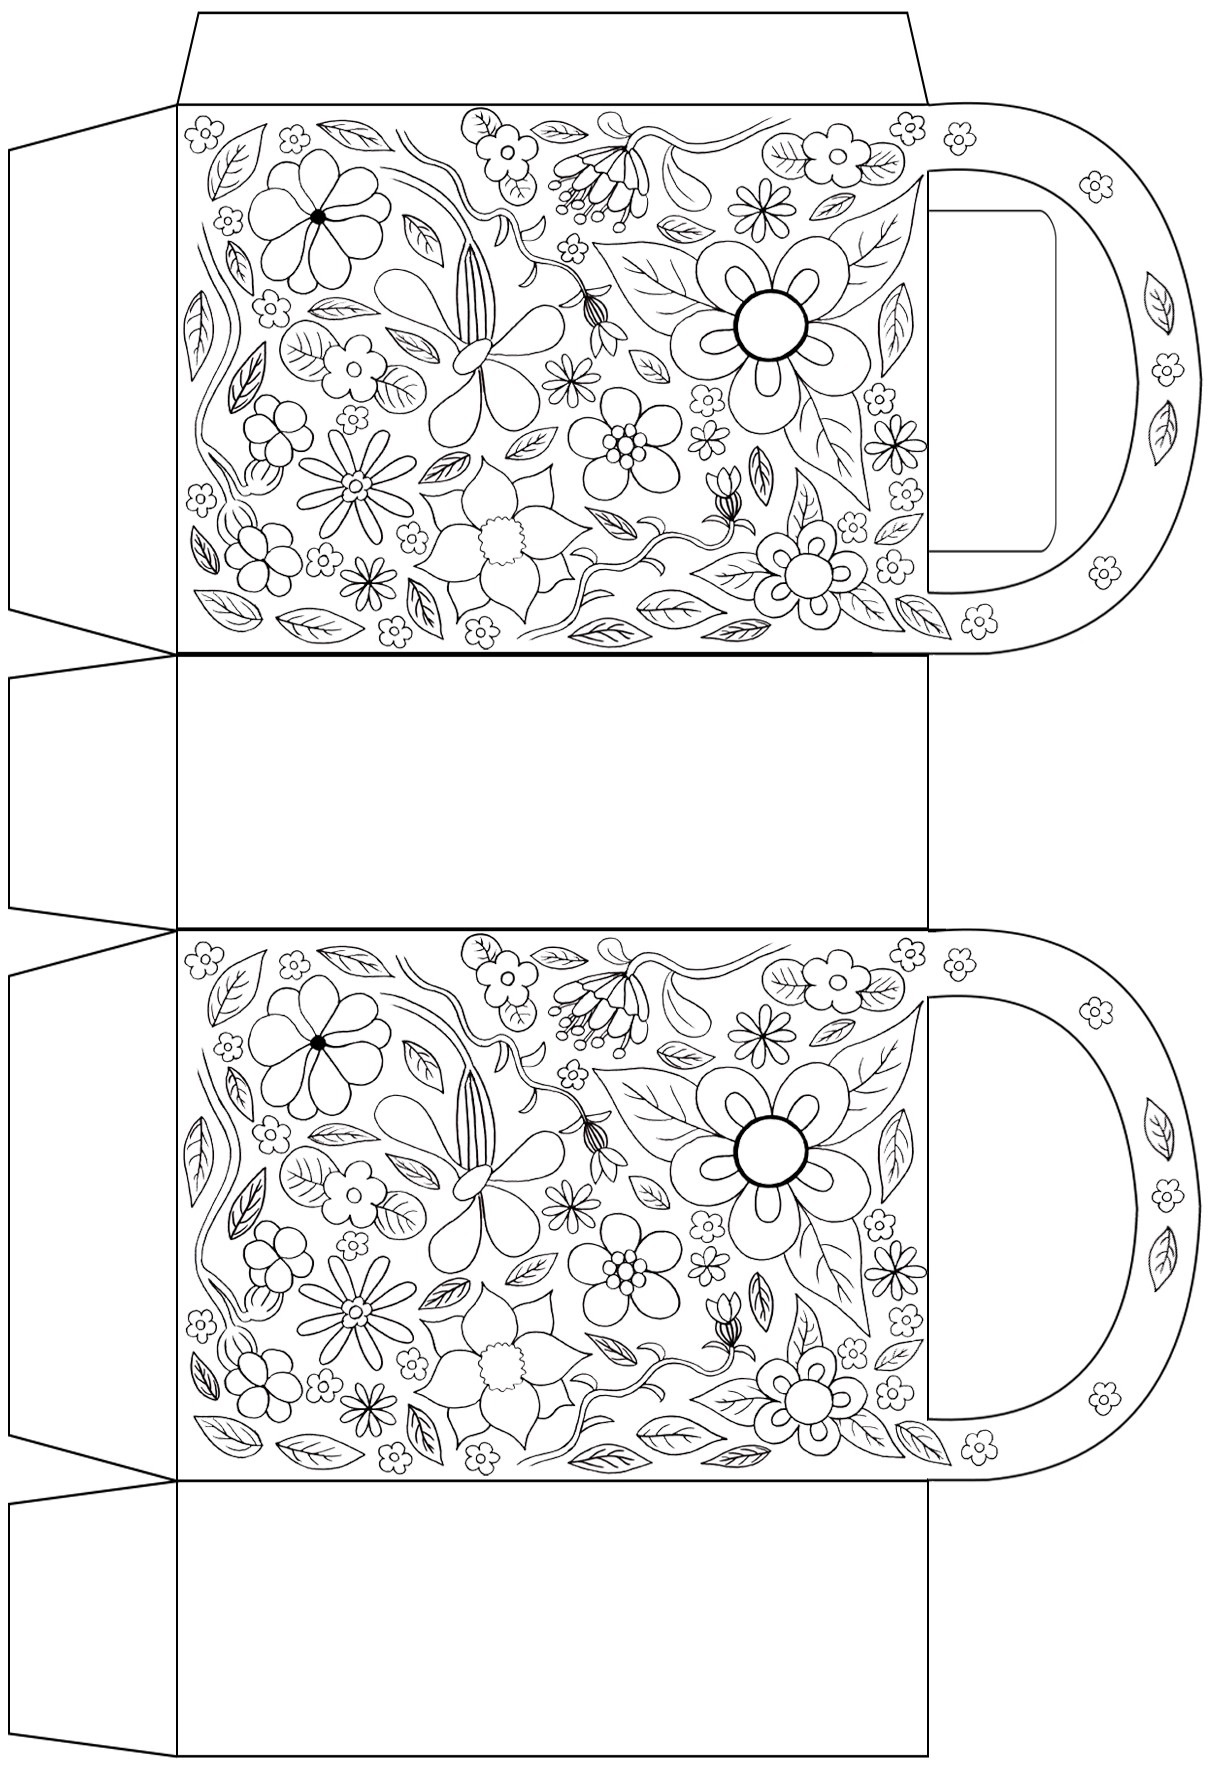 Garden flowers gift bag to colour in